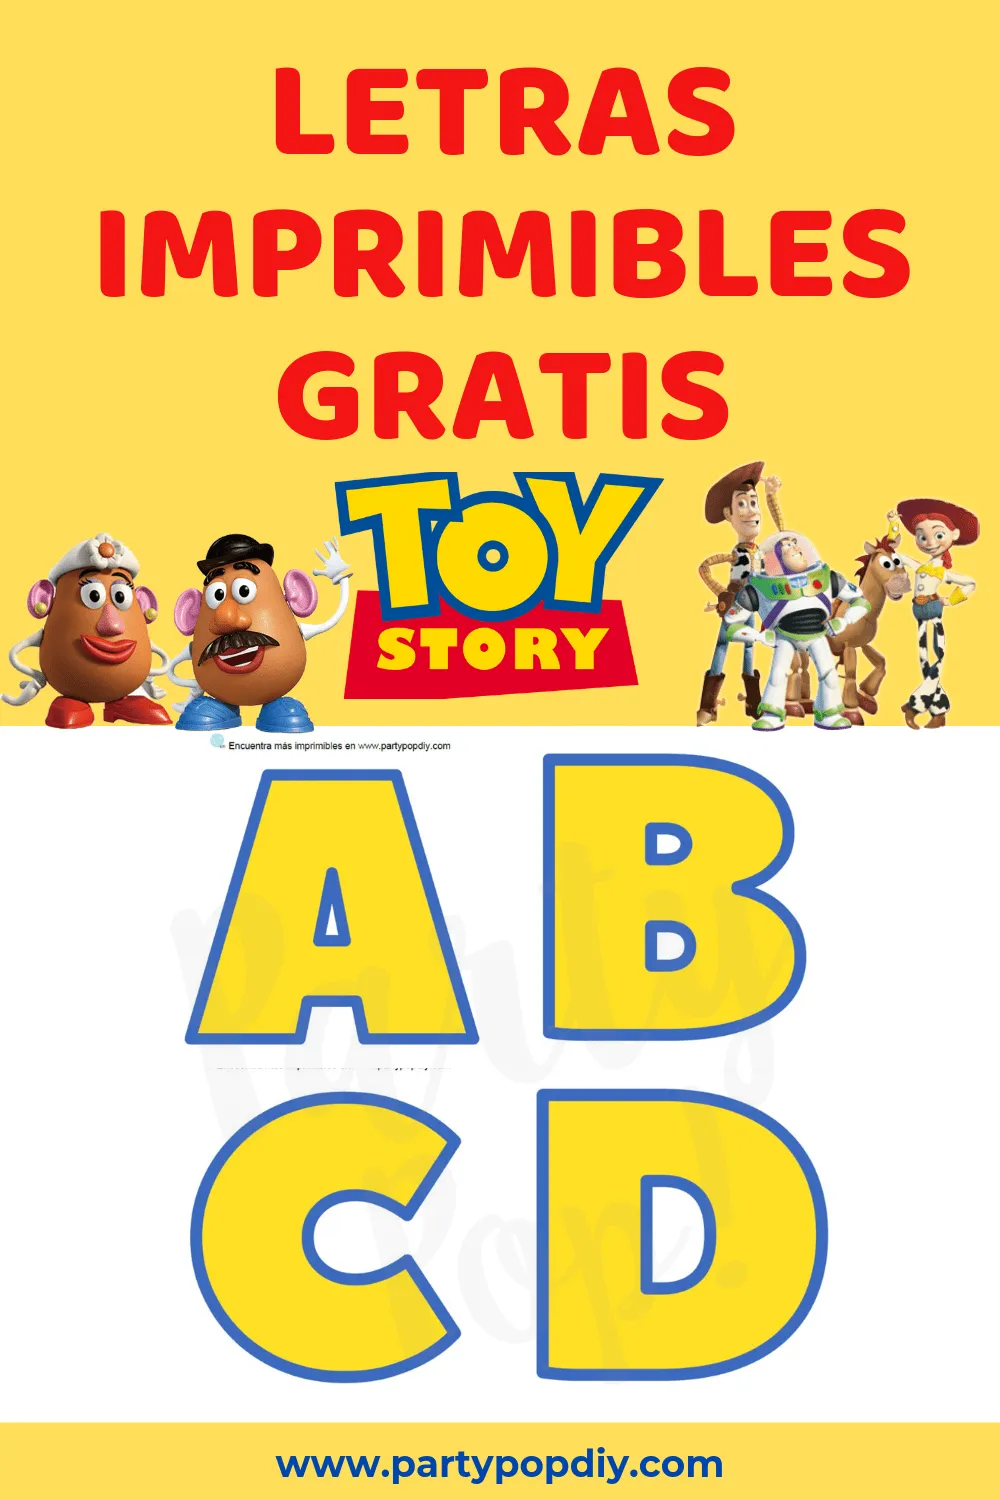 letras toy story imprimibles gratis #toystory | Invitaciones de toy story, Toy  story, Imprimibles toy story